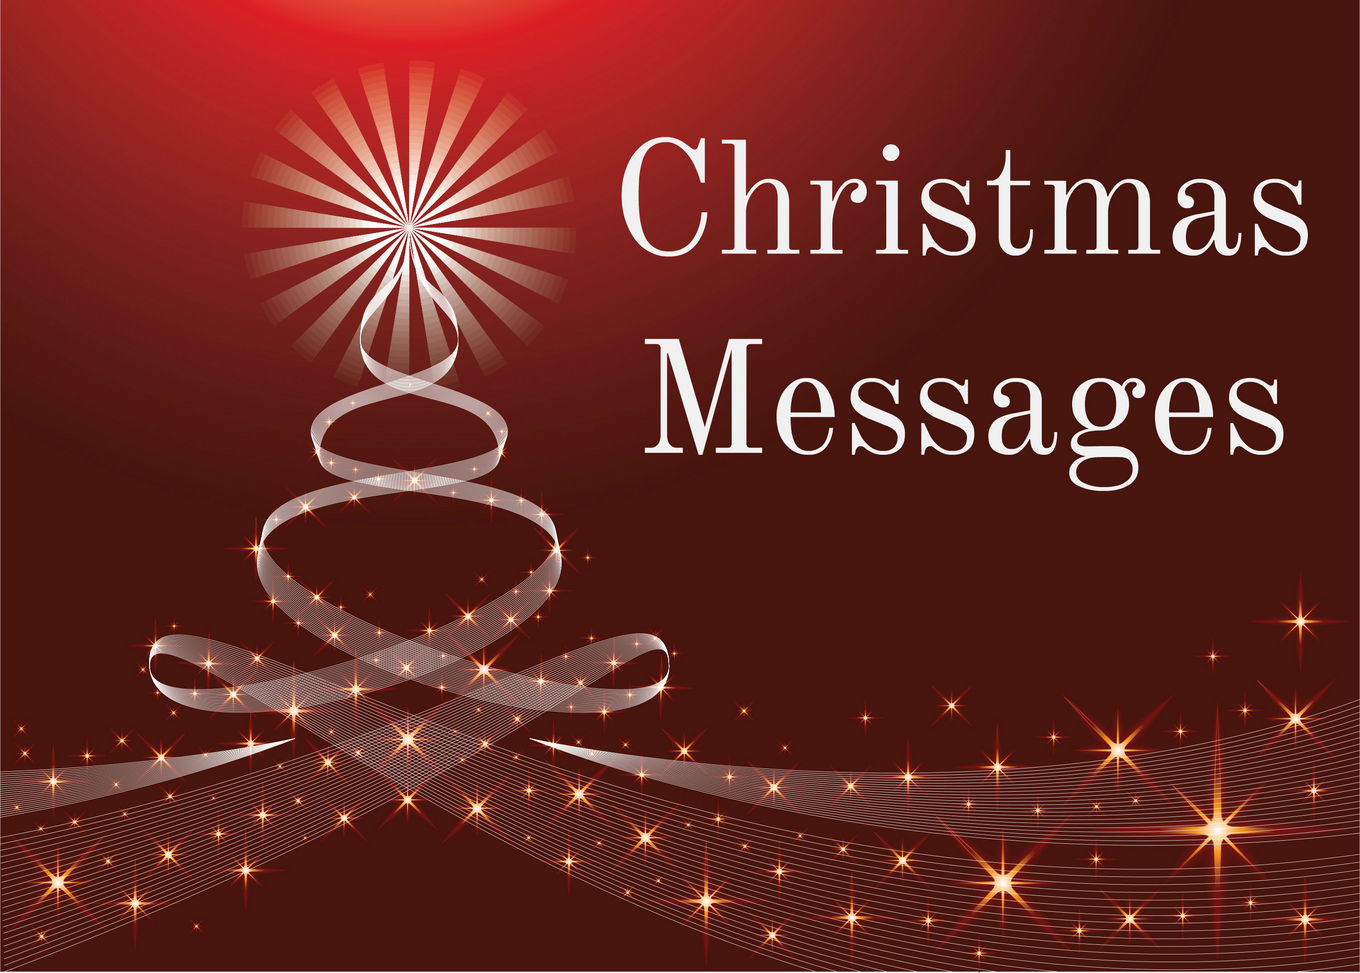 Christmas Messages banner